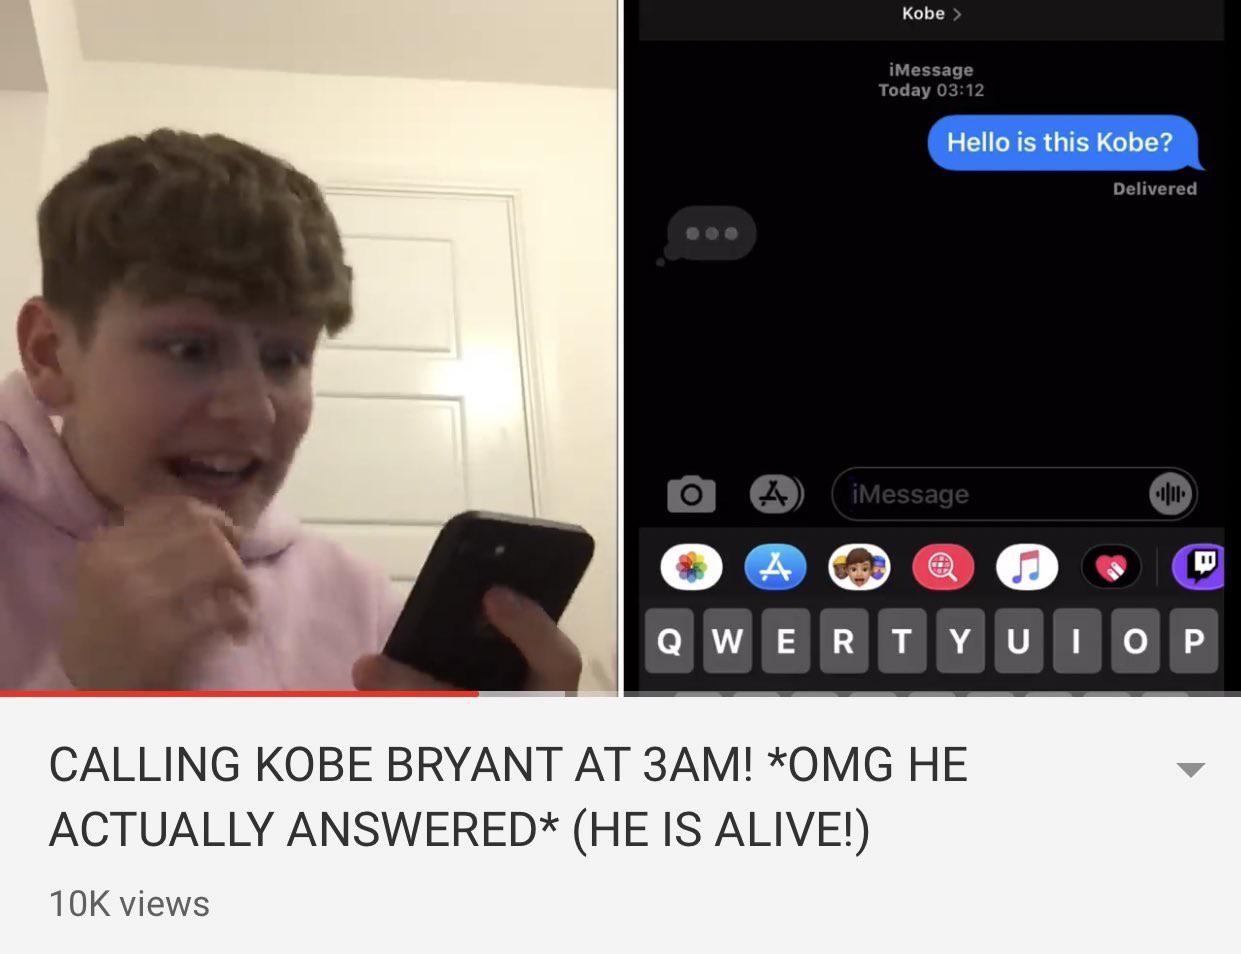 video - Kobe > iMessage Today Hello is this Kobe? Delivered O A iMessage Wertyuiop E T Y Calling Kobe Bryant At 3AM! Omg He Actually Answered He Is Alive! 106 views